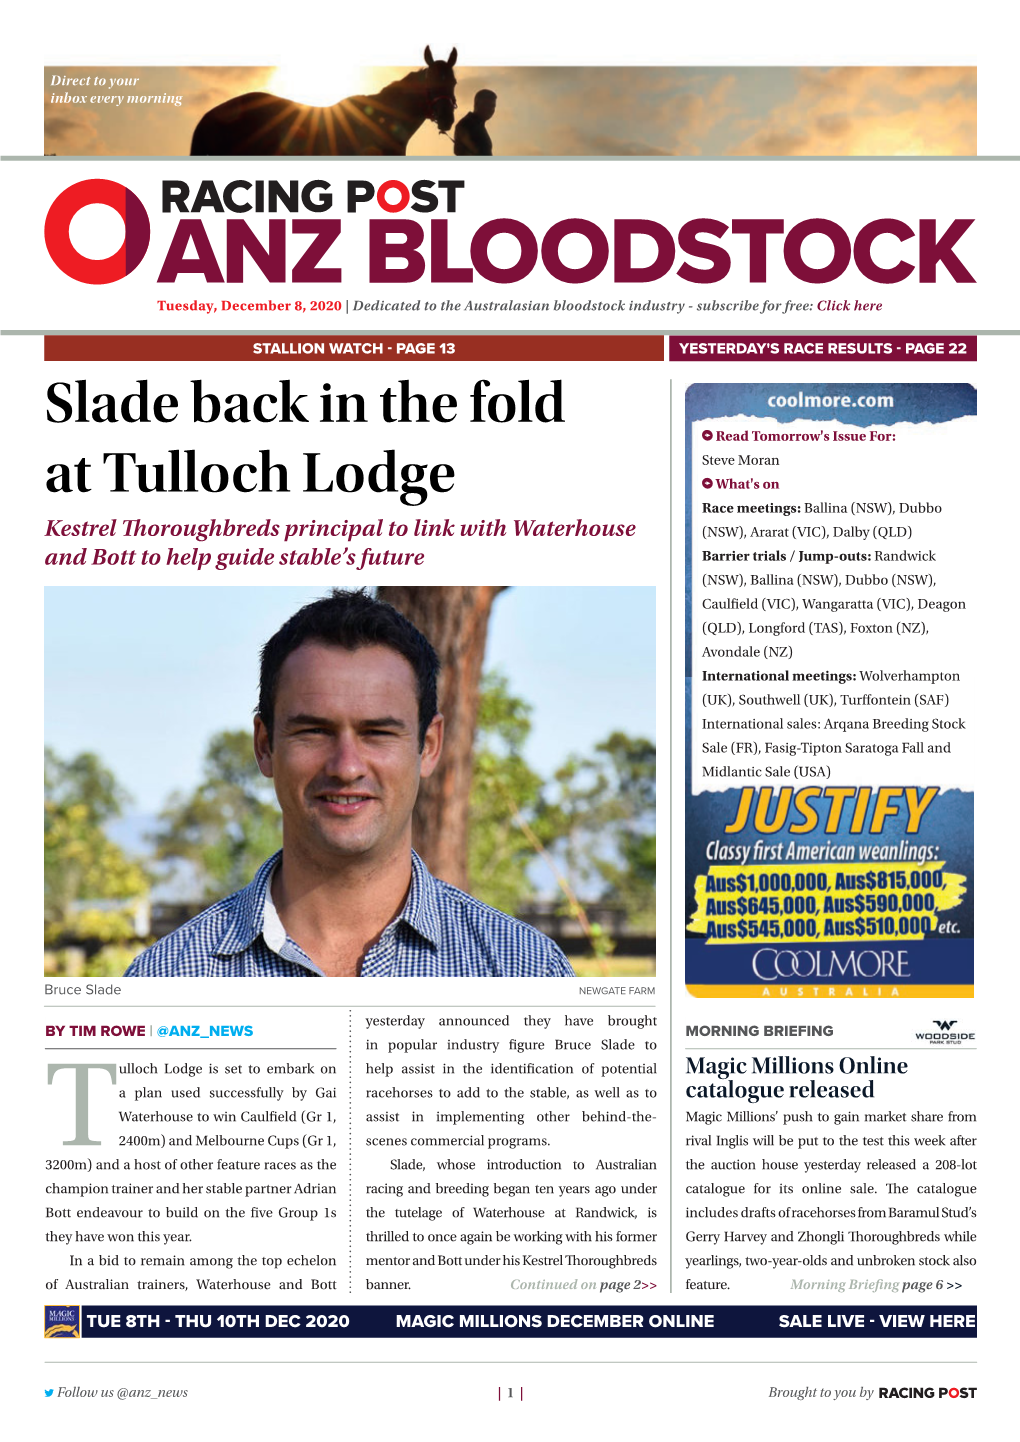 Slade Back in the Fold at Tulloch Lodge | 2 | Tuesday, December 8, 2020